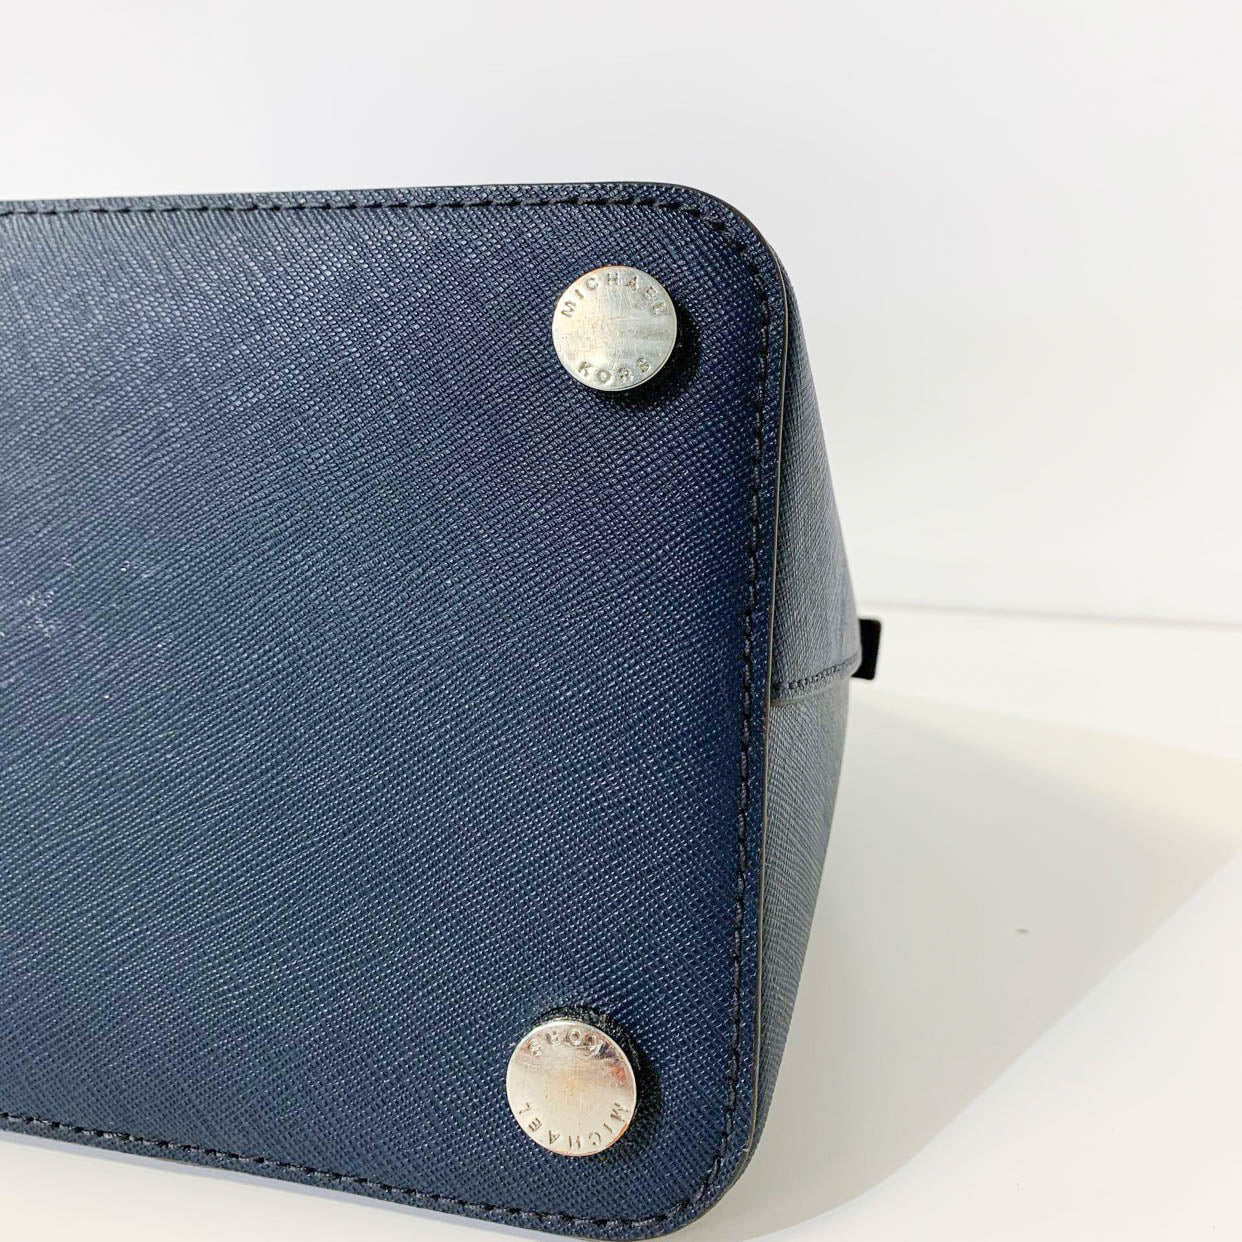 Navy Saffiano Leather Top Handle Bag